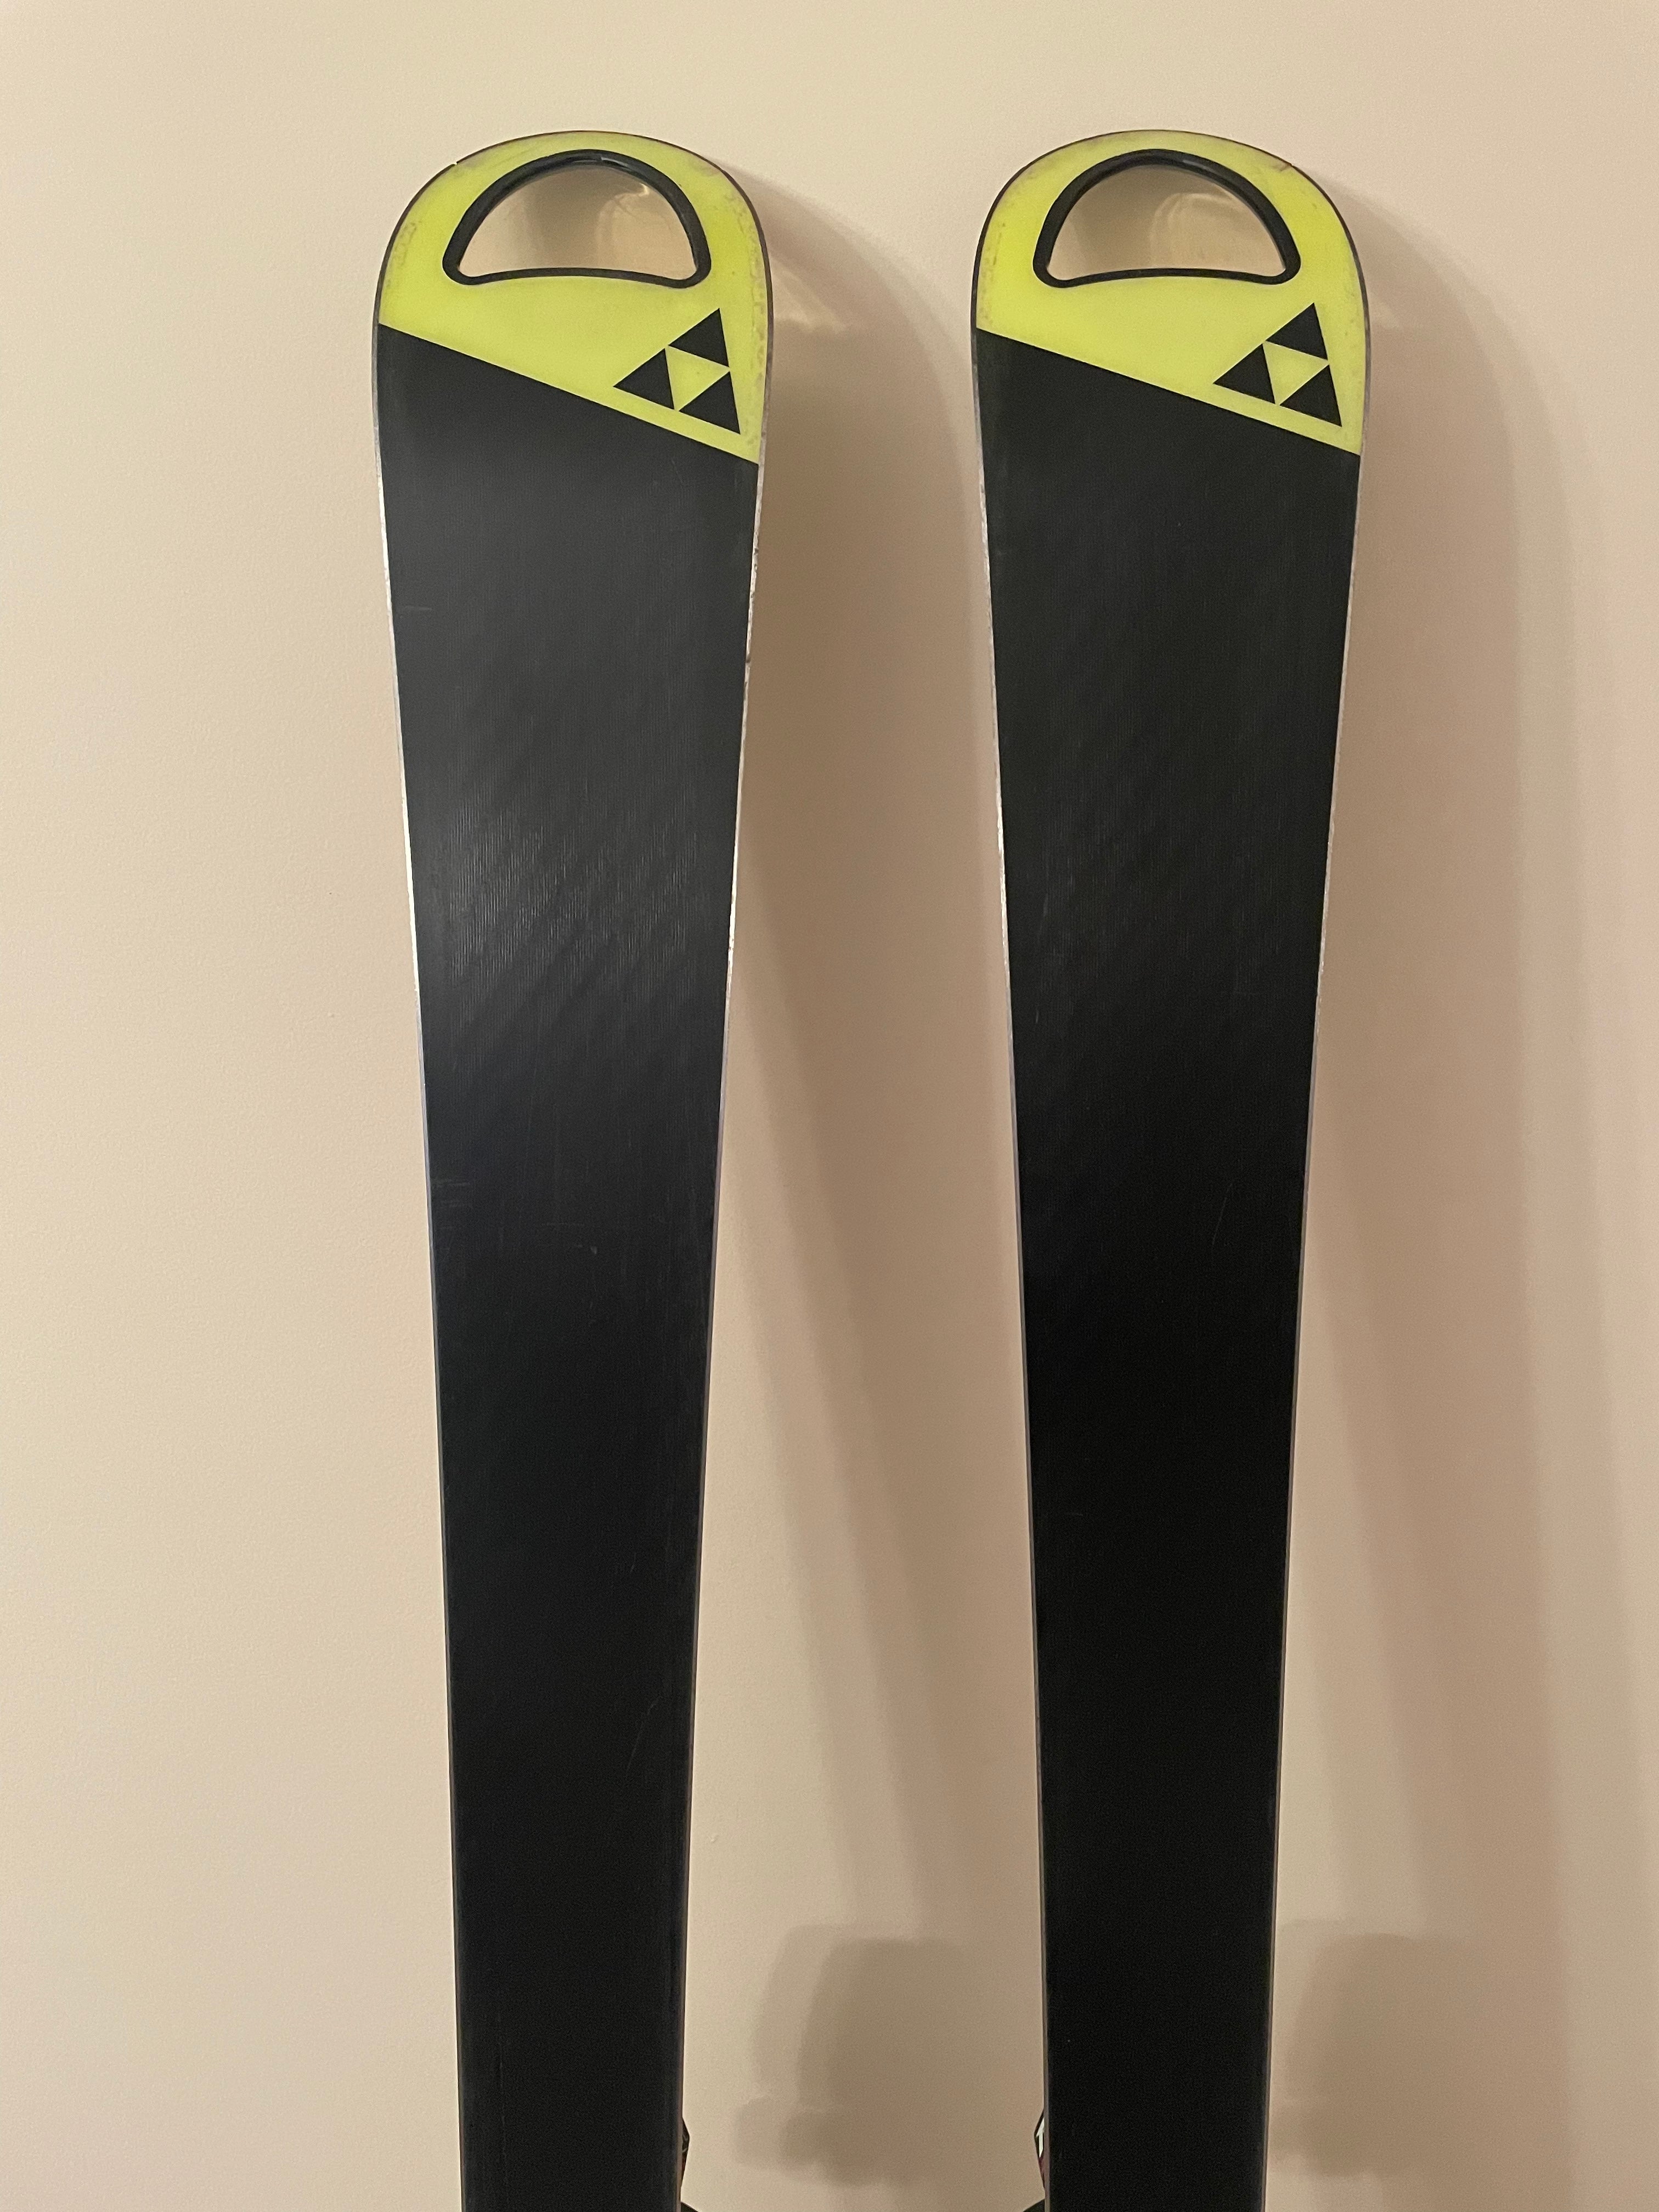 Fischer 165cm RC4 World Cup SC With Z13 Bindings | SidelineSwap